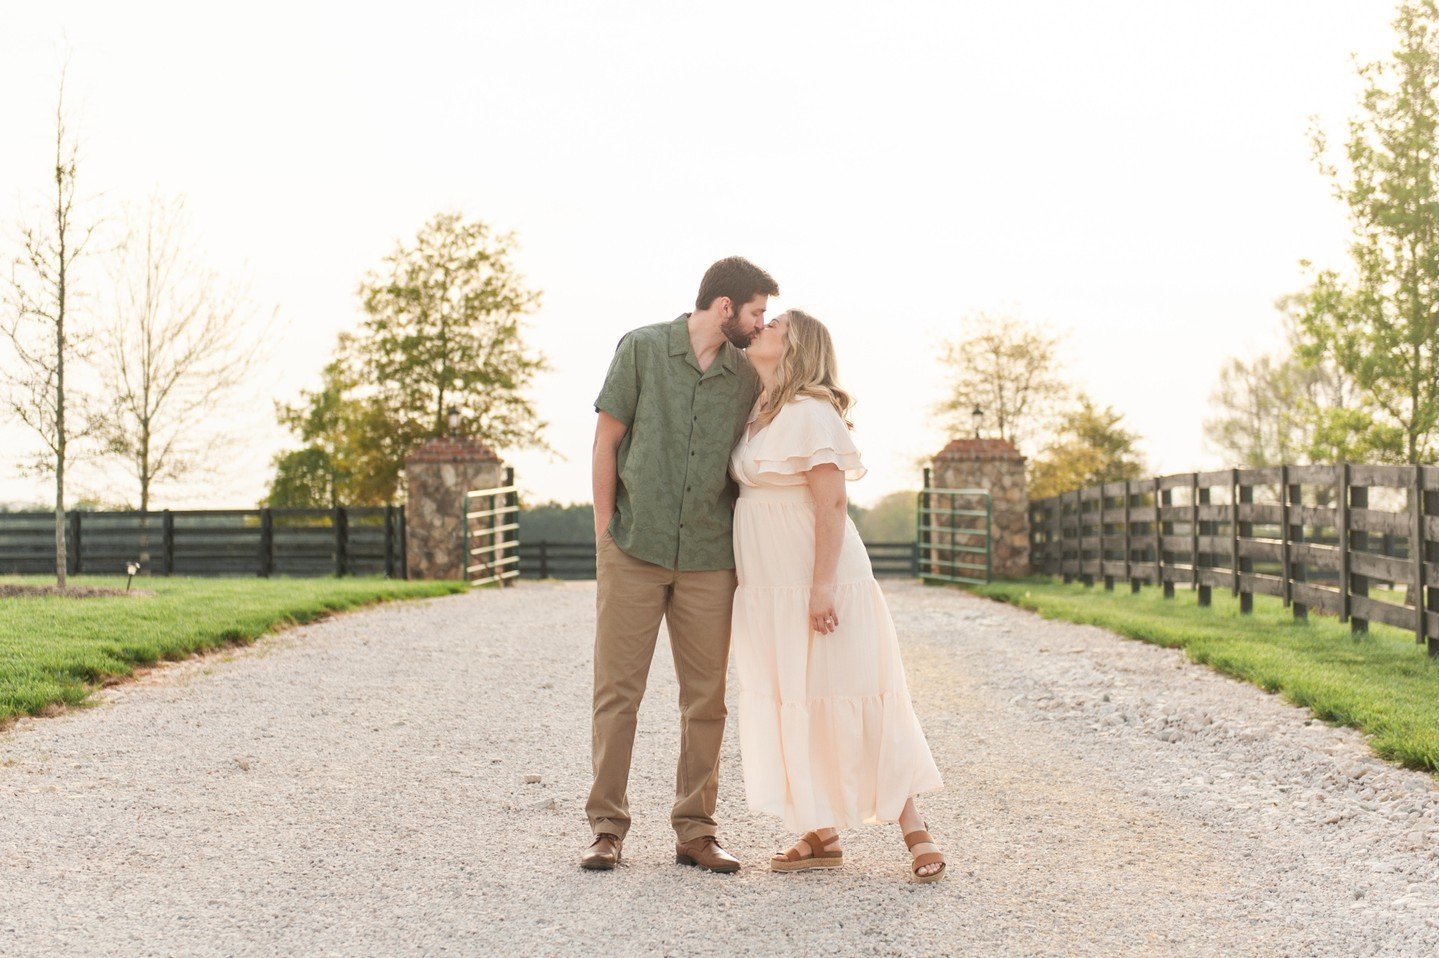 I got to take Tori &amp; Carter's engagement photos at one of my favorite local venues last month...what a beautiful evening!  Giggles and grins and a gorgeous sunset made for a perfect evening.  If you're looking for a wedding venue or just a spot f